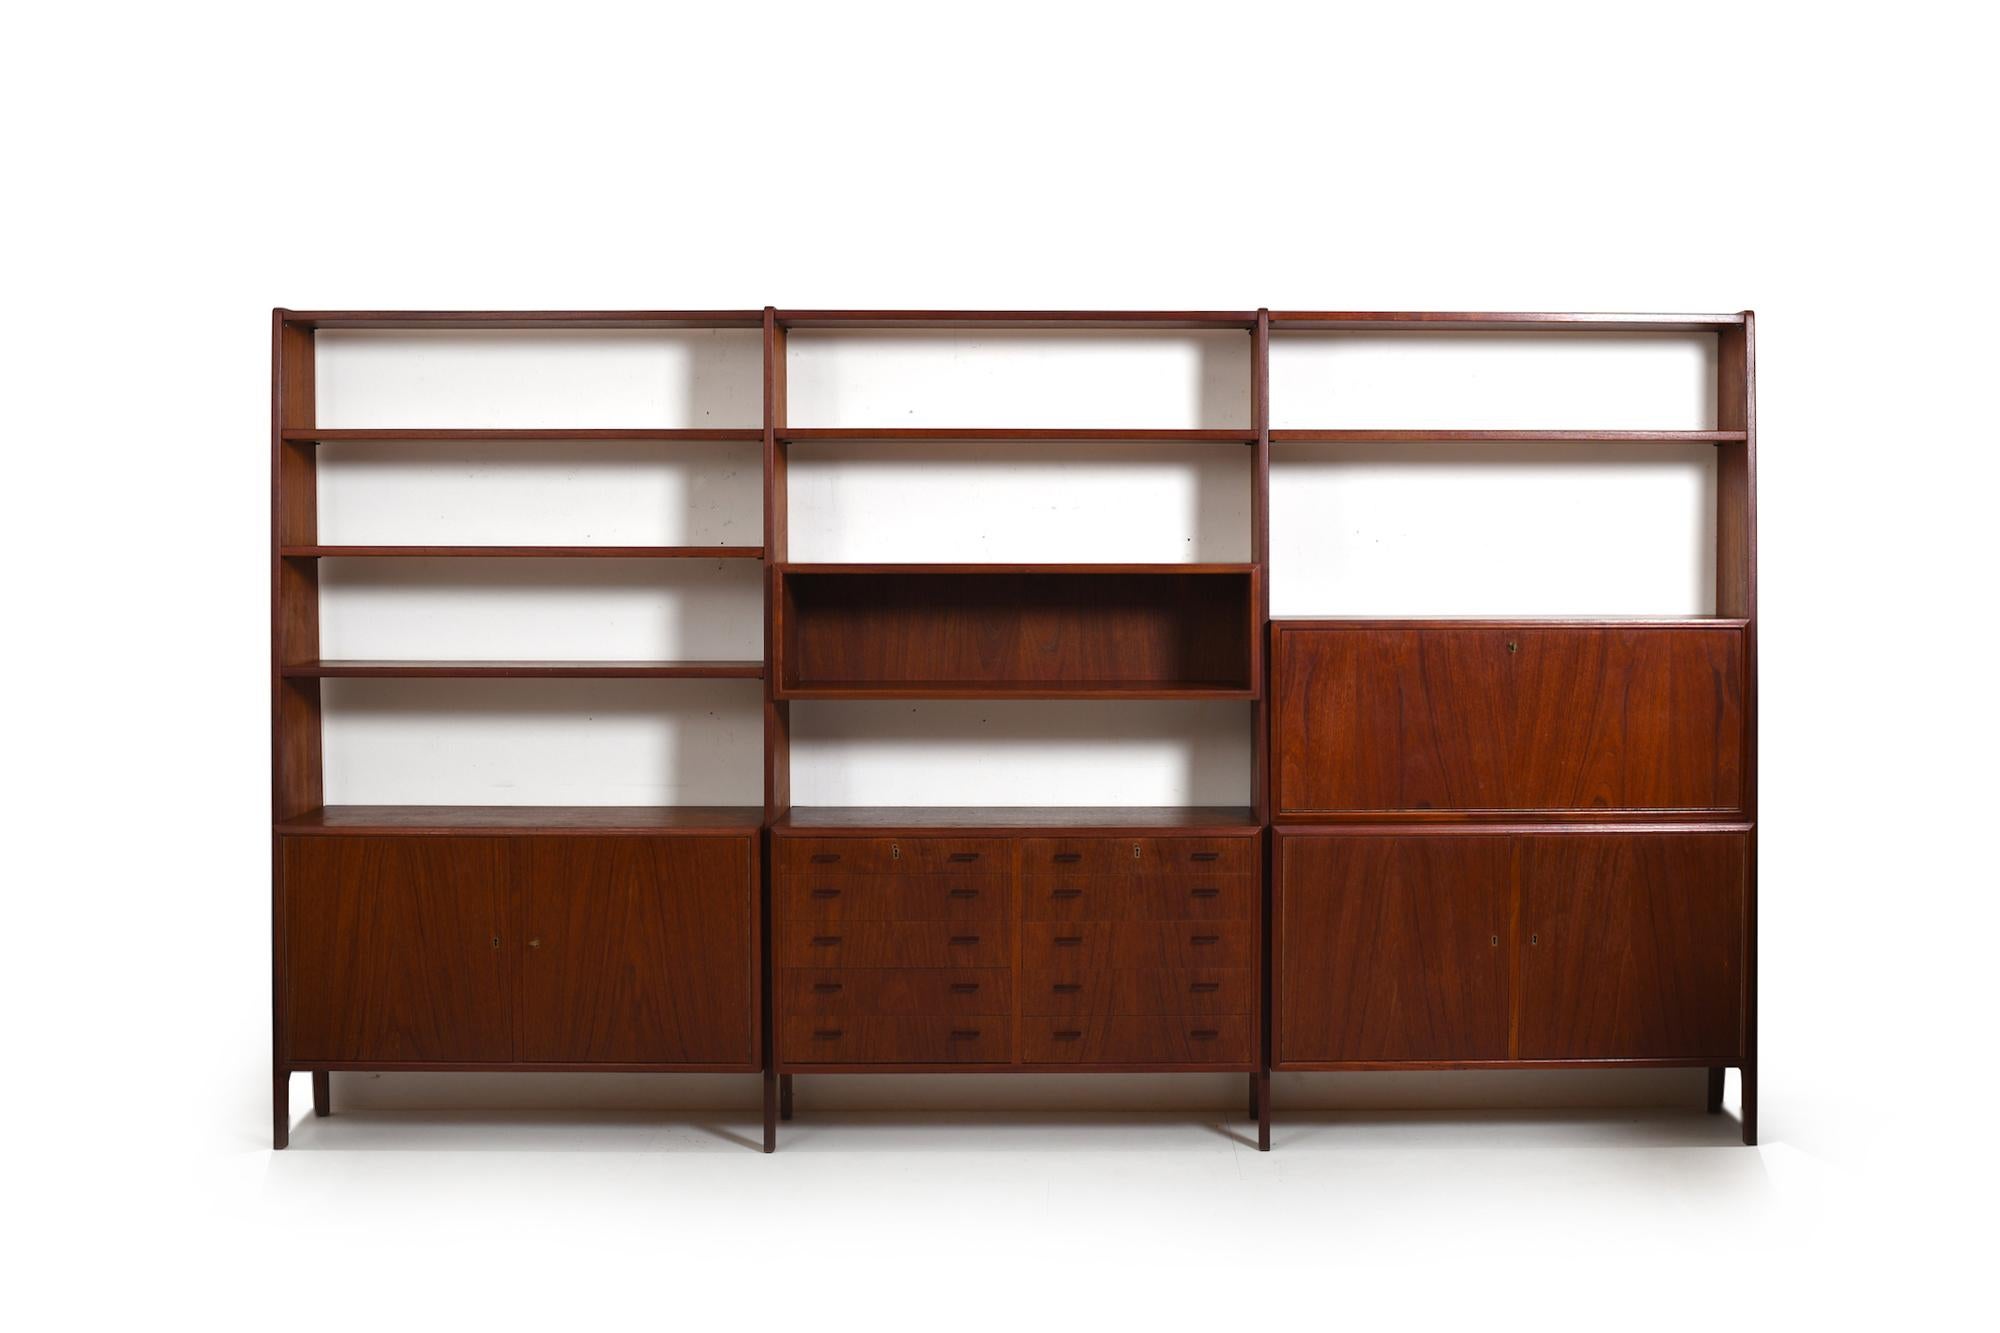 Danish Freestanding Teak Shelf System 1950s with Cabinets For Sale 6